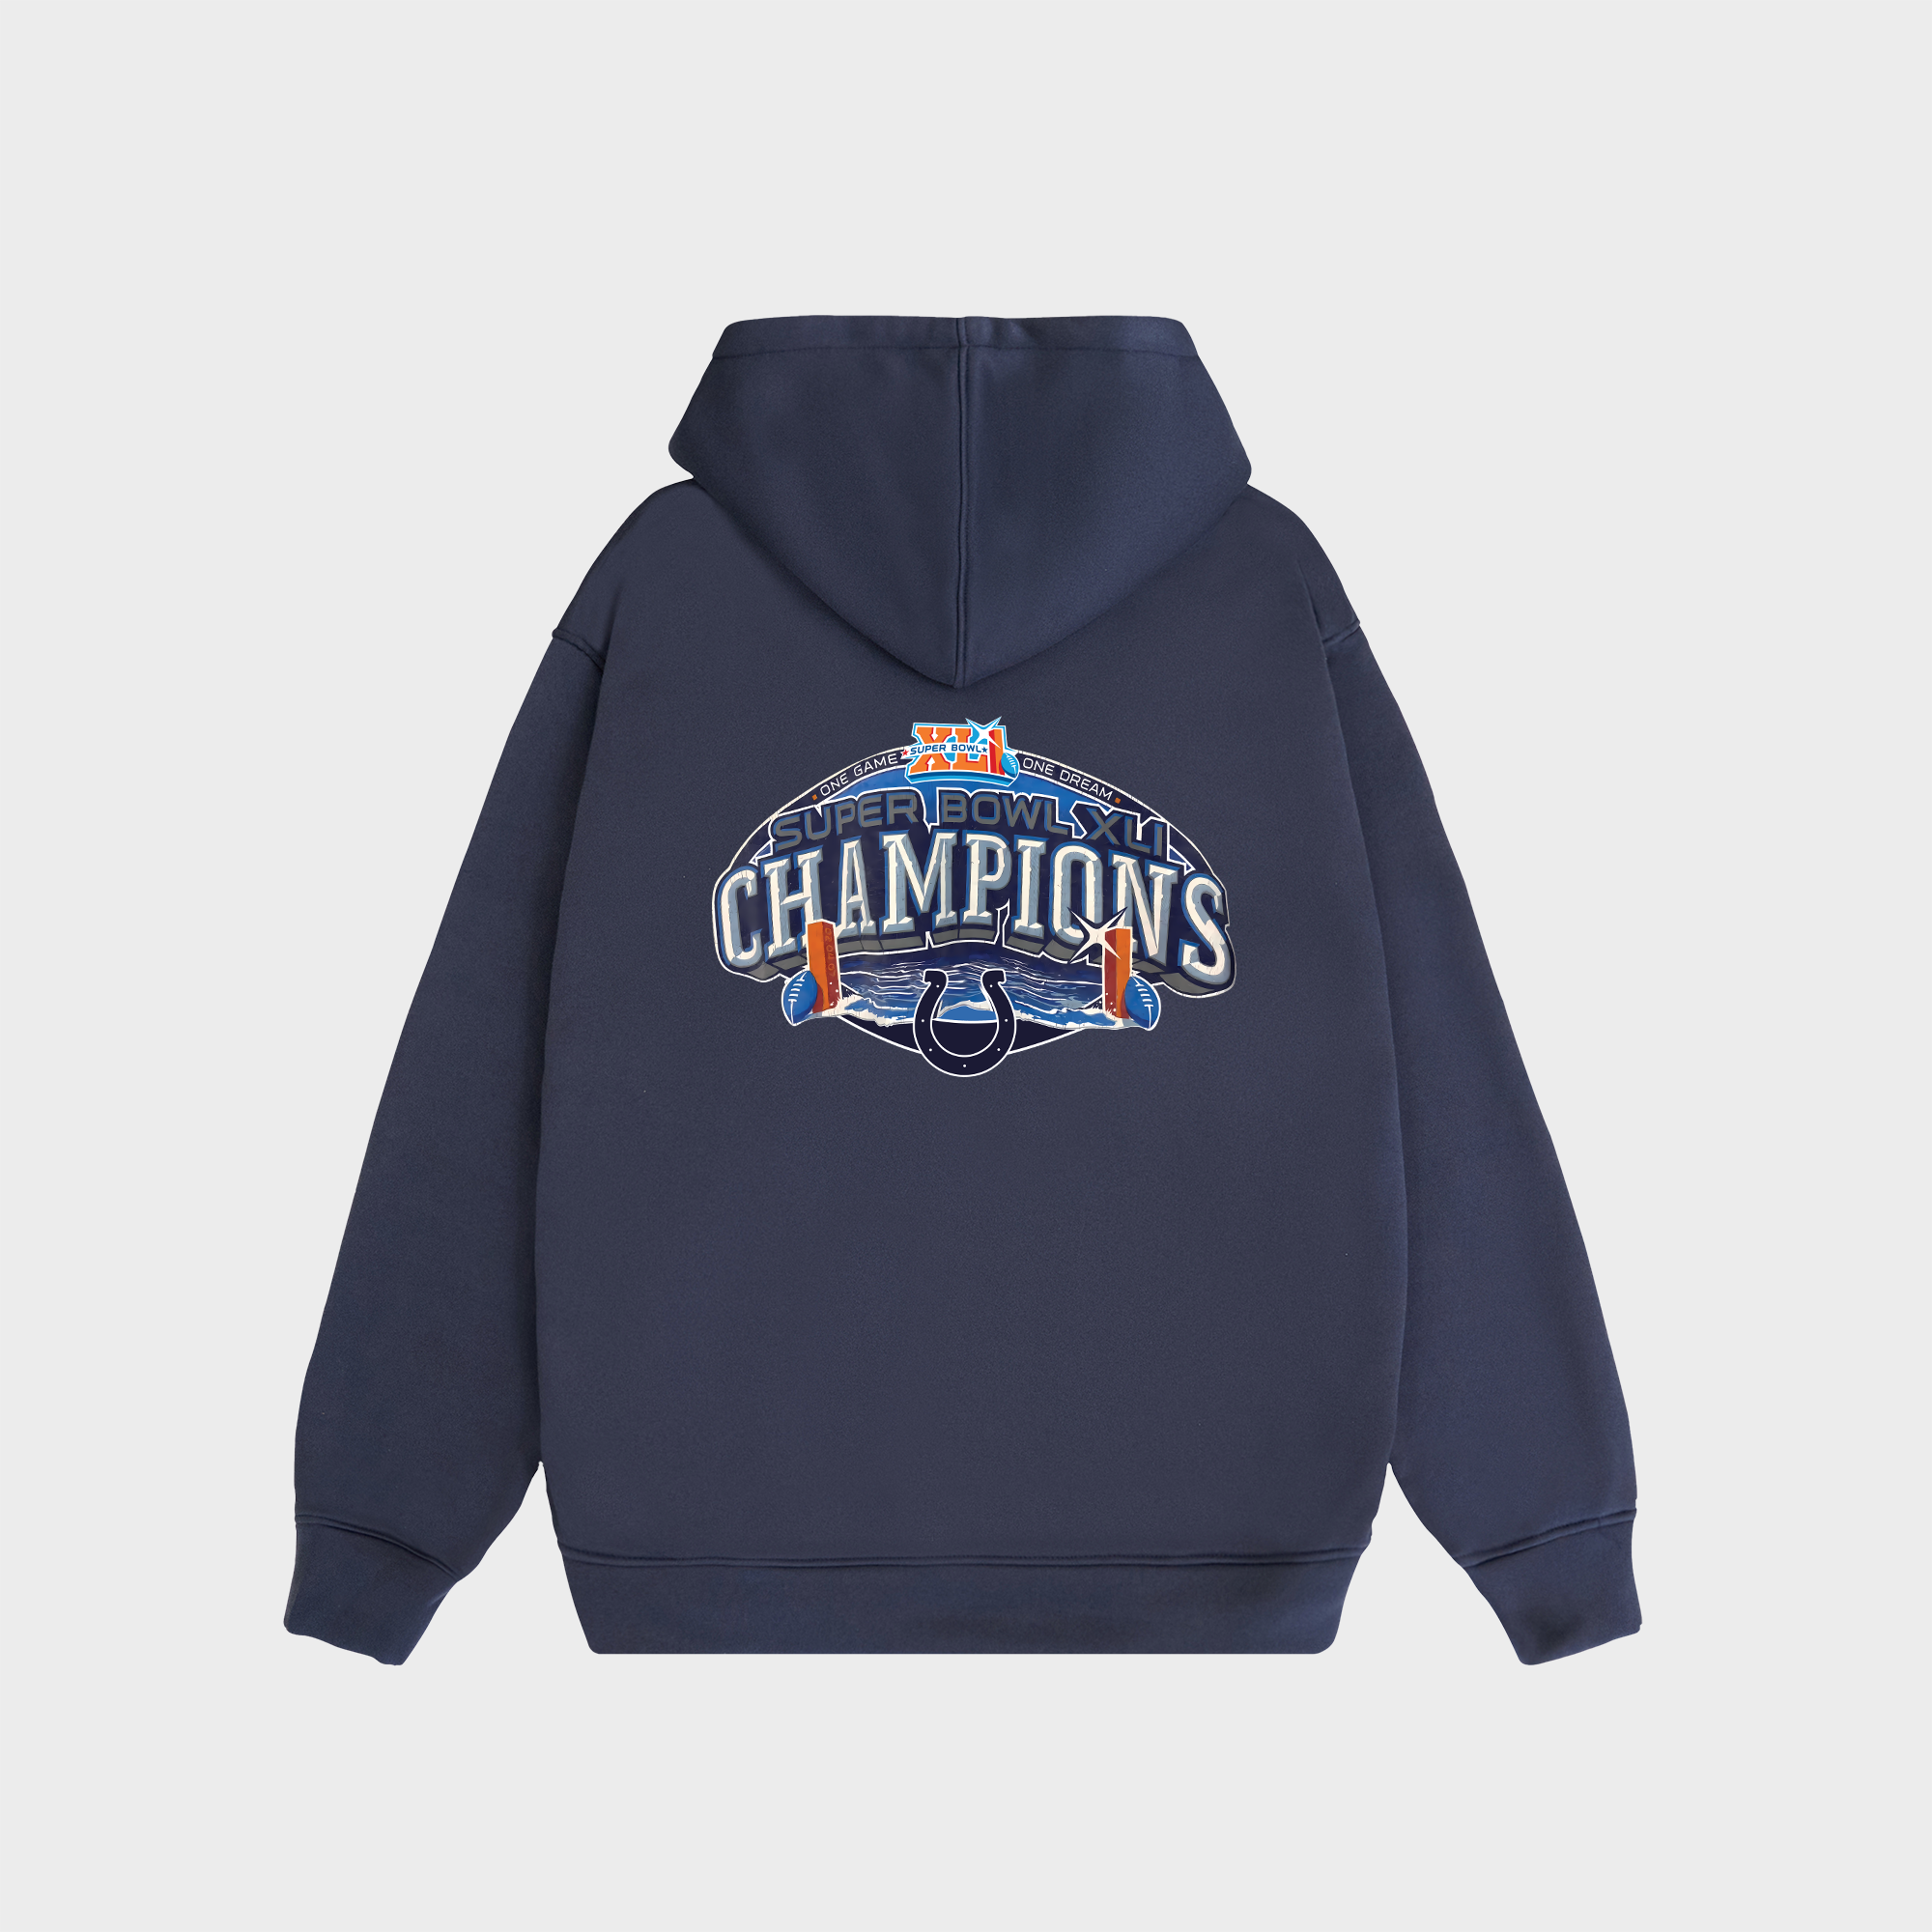 NFL Champs Indianapolis Colts Hoodie